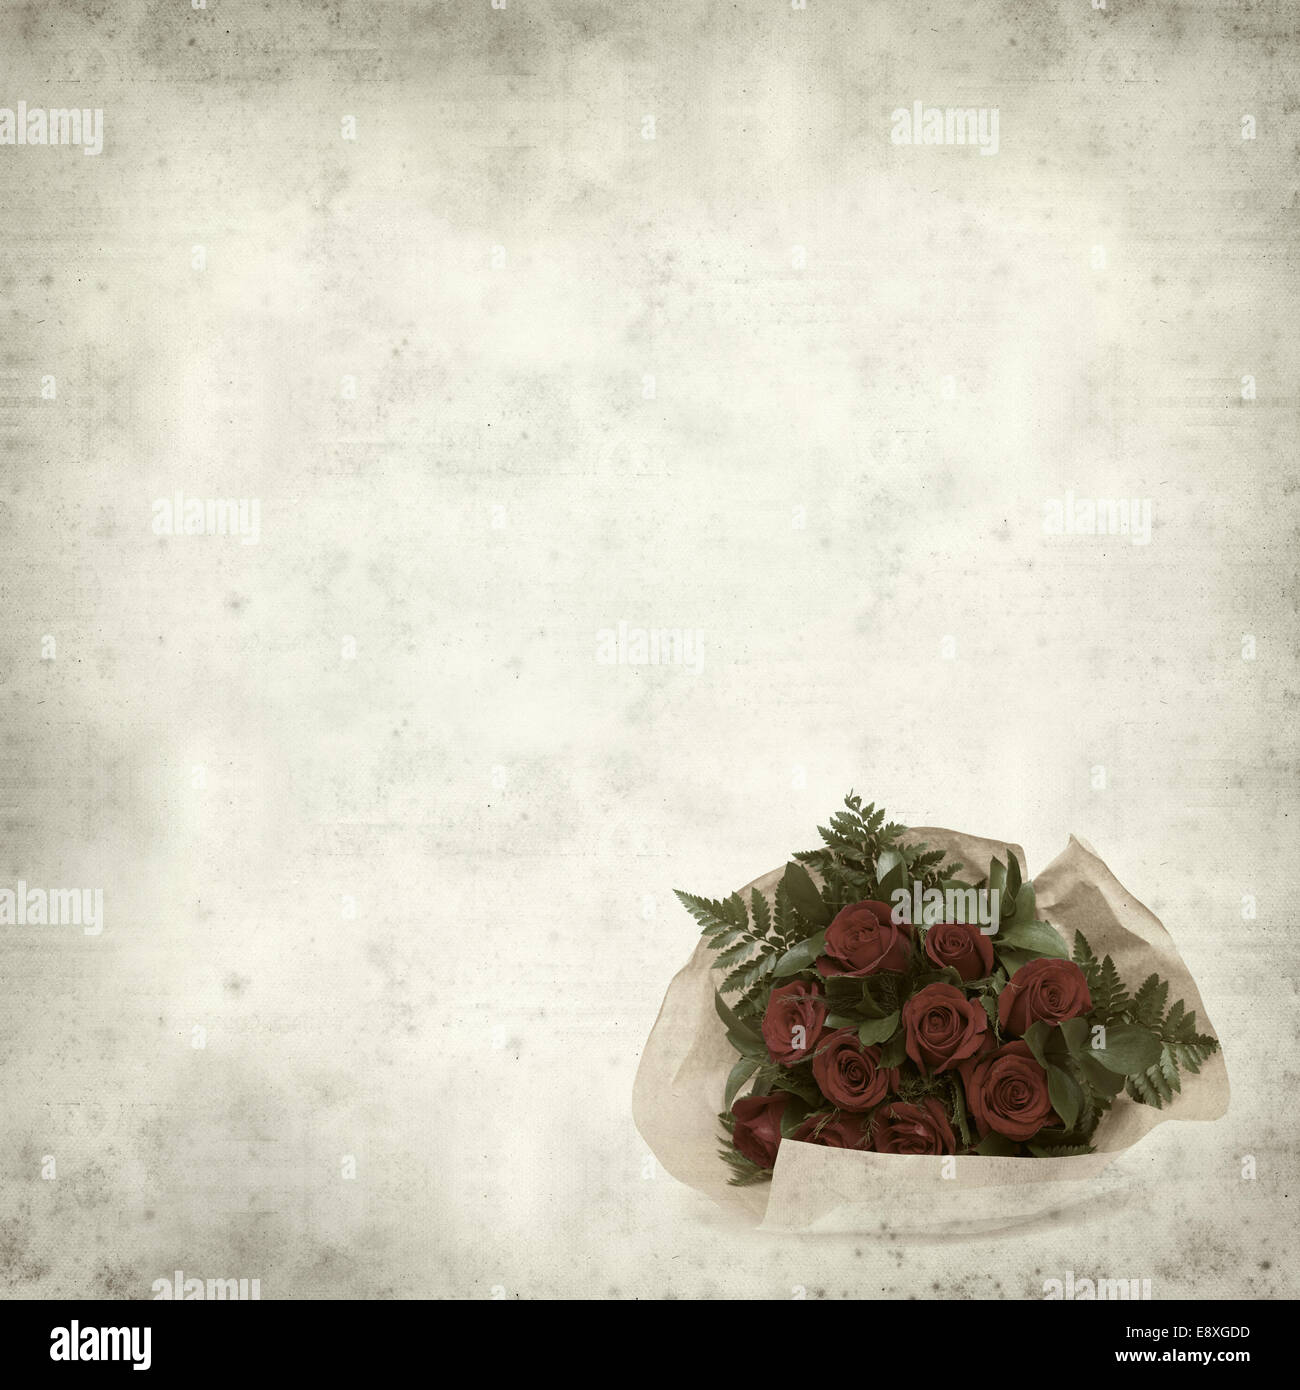 Grunge Background with Vintage Album with Roses Stock Illustration -  Illustration of happy, flowers: 150456672